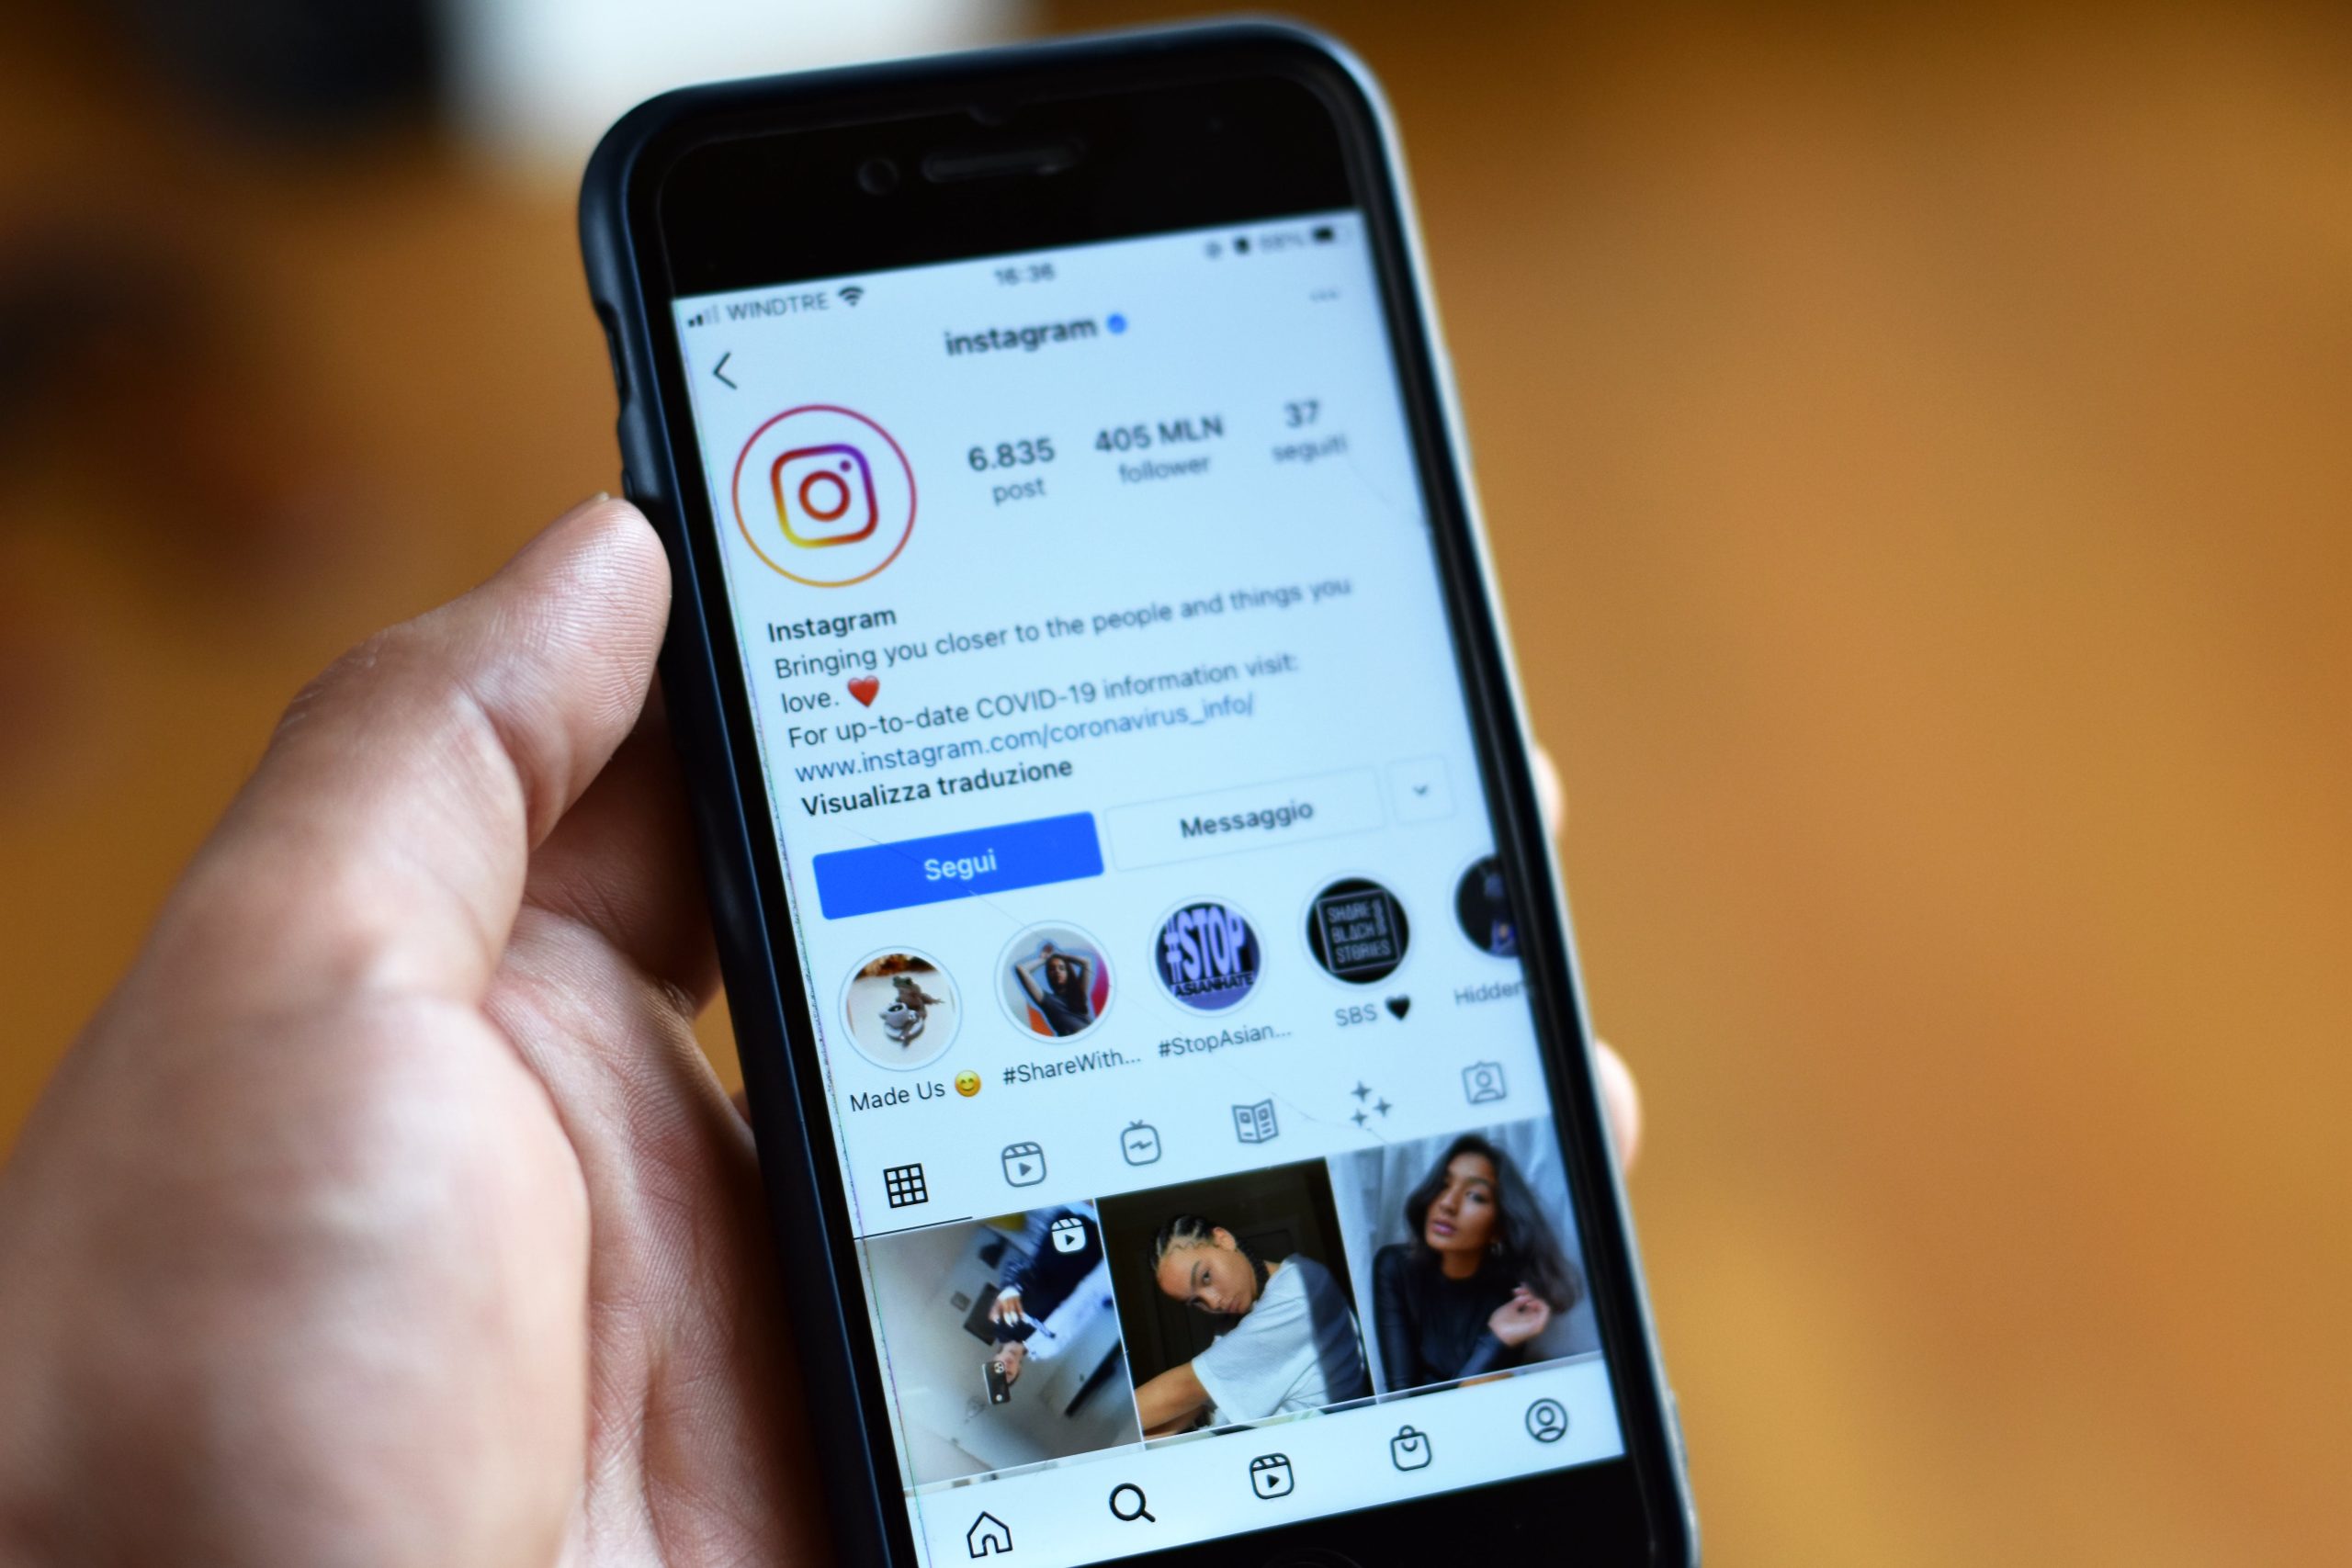 Why do you Need an Instagram Photo Download Tool